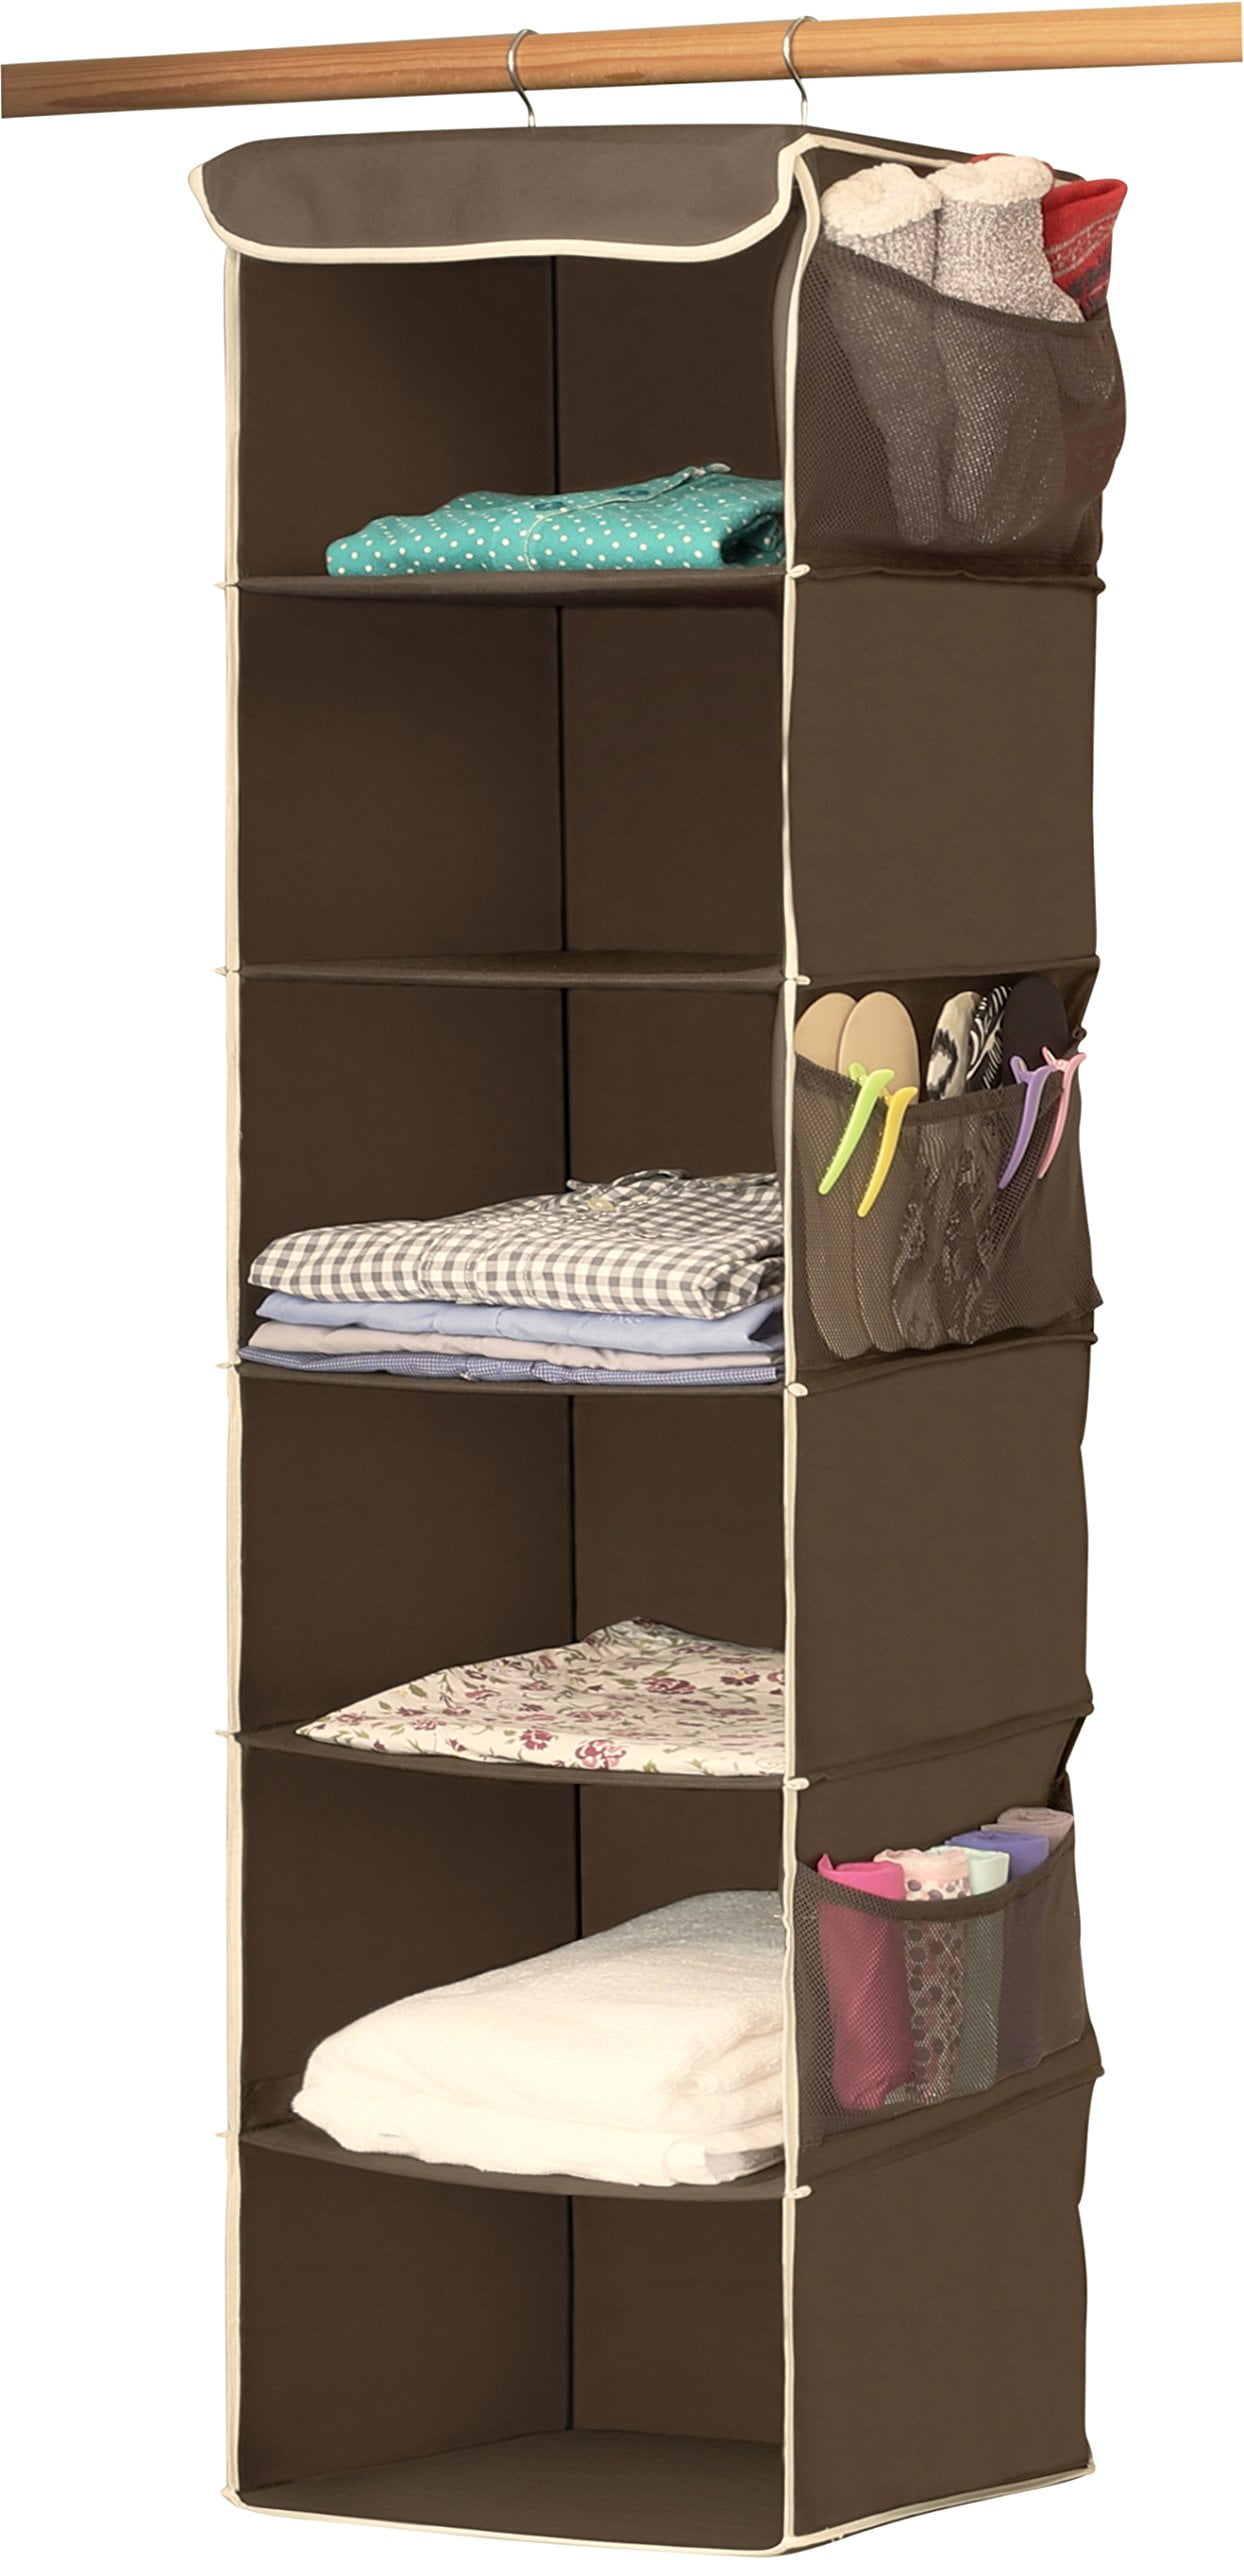 Deconstructed – Easy Closet Design with Hanging Shelves and Shoe Storage –  Rolanda L., Professional Organizer